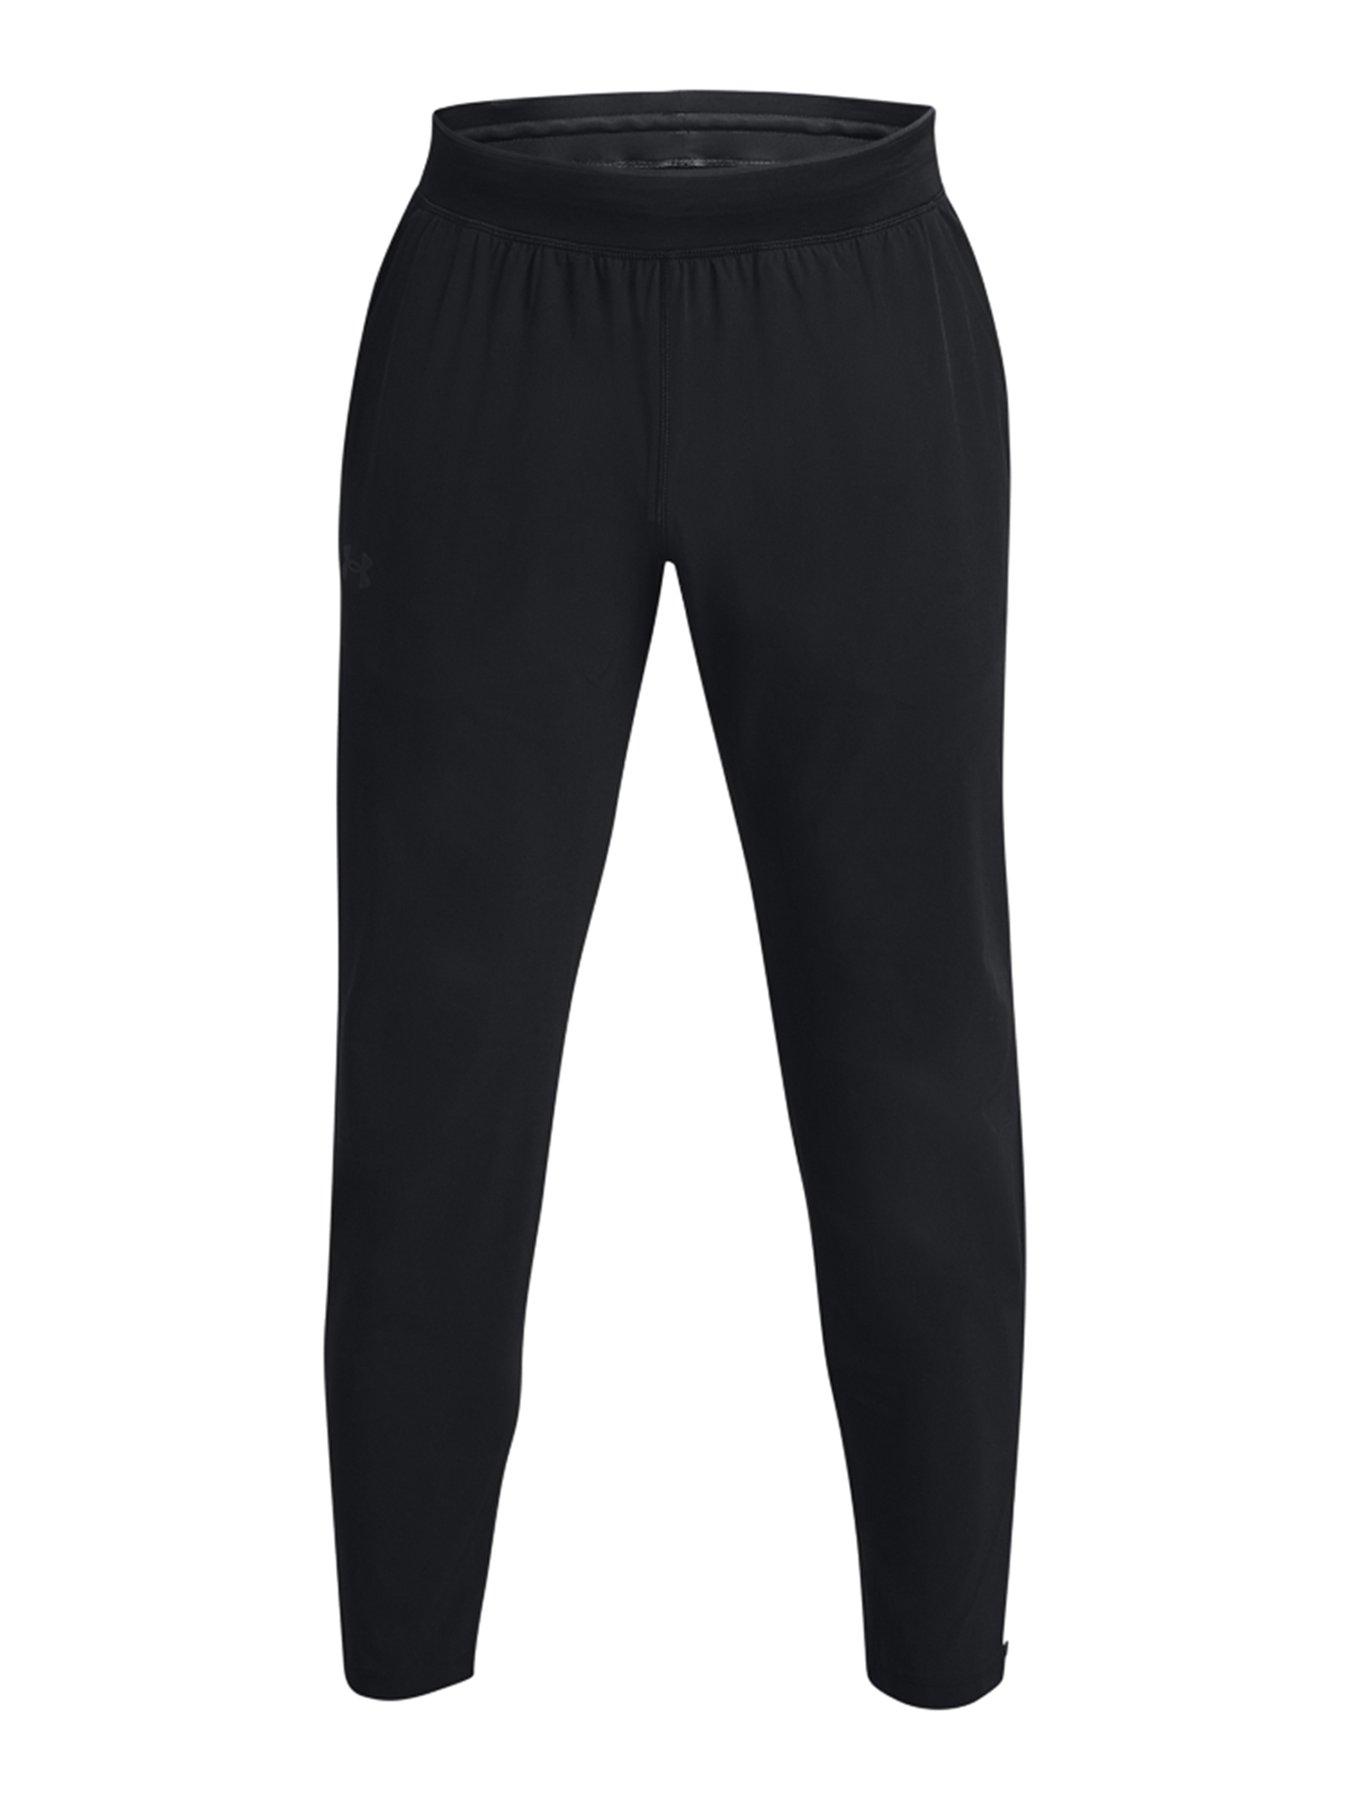 Under Armour, Pants & Jumpsuits, Under Armour Athletic Yoga Pants Womens  Small Black Stretchy All Season Running